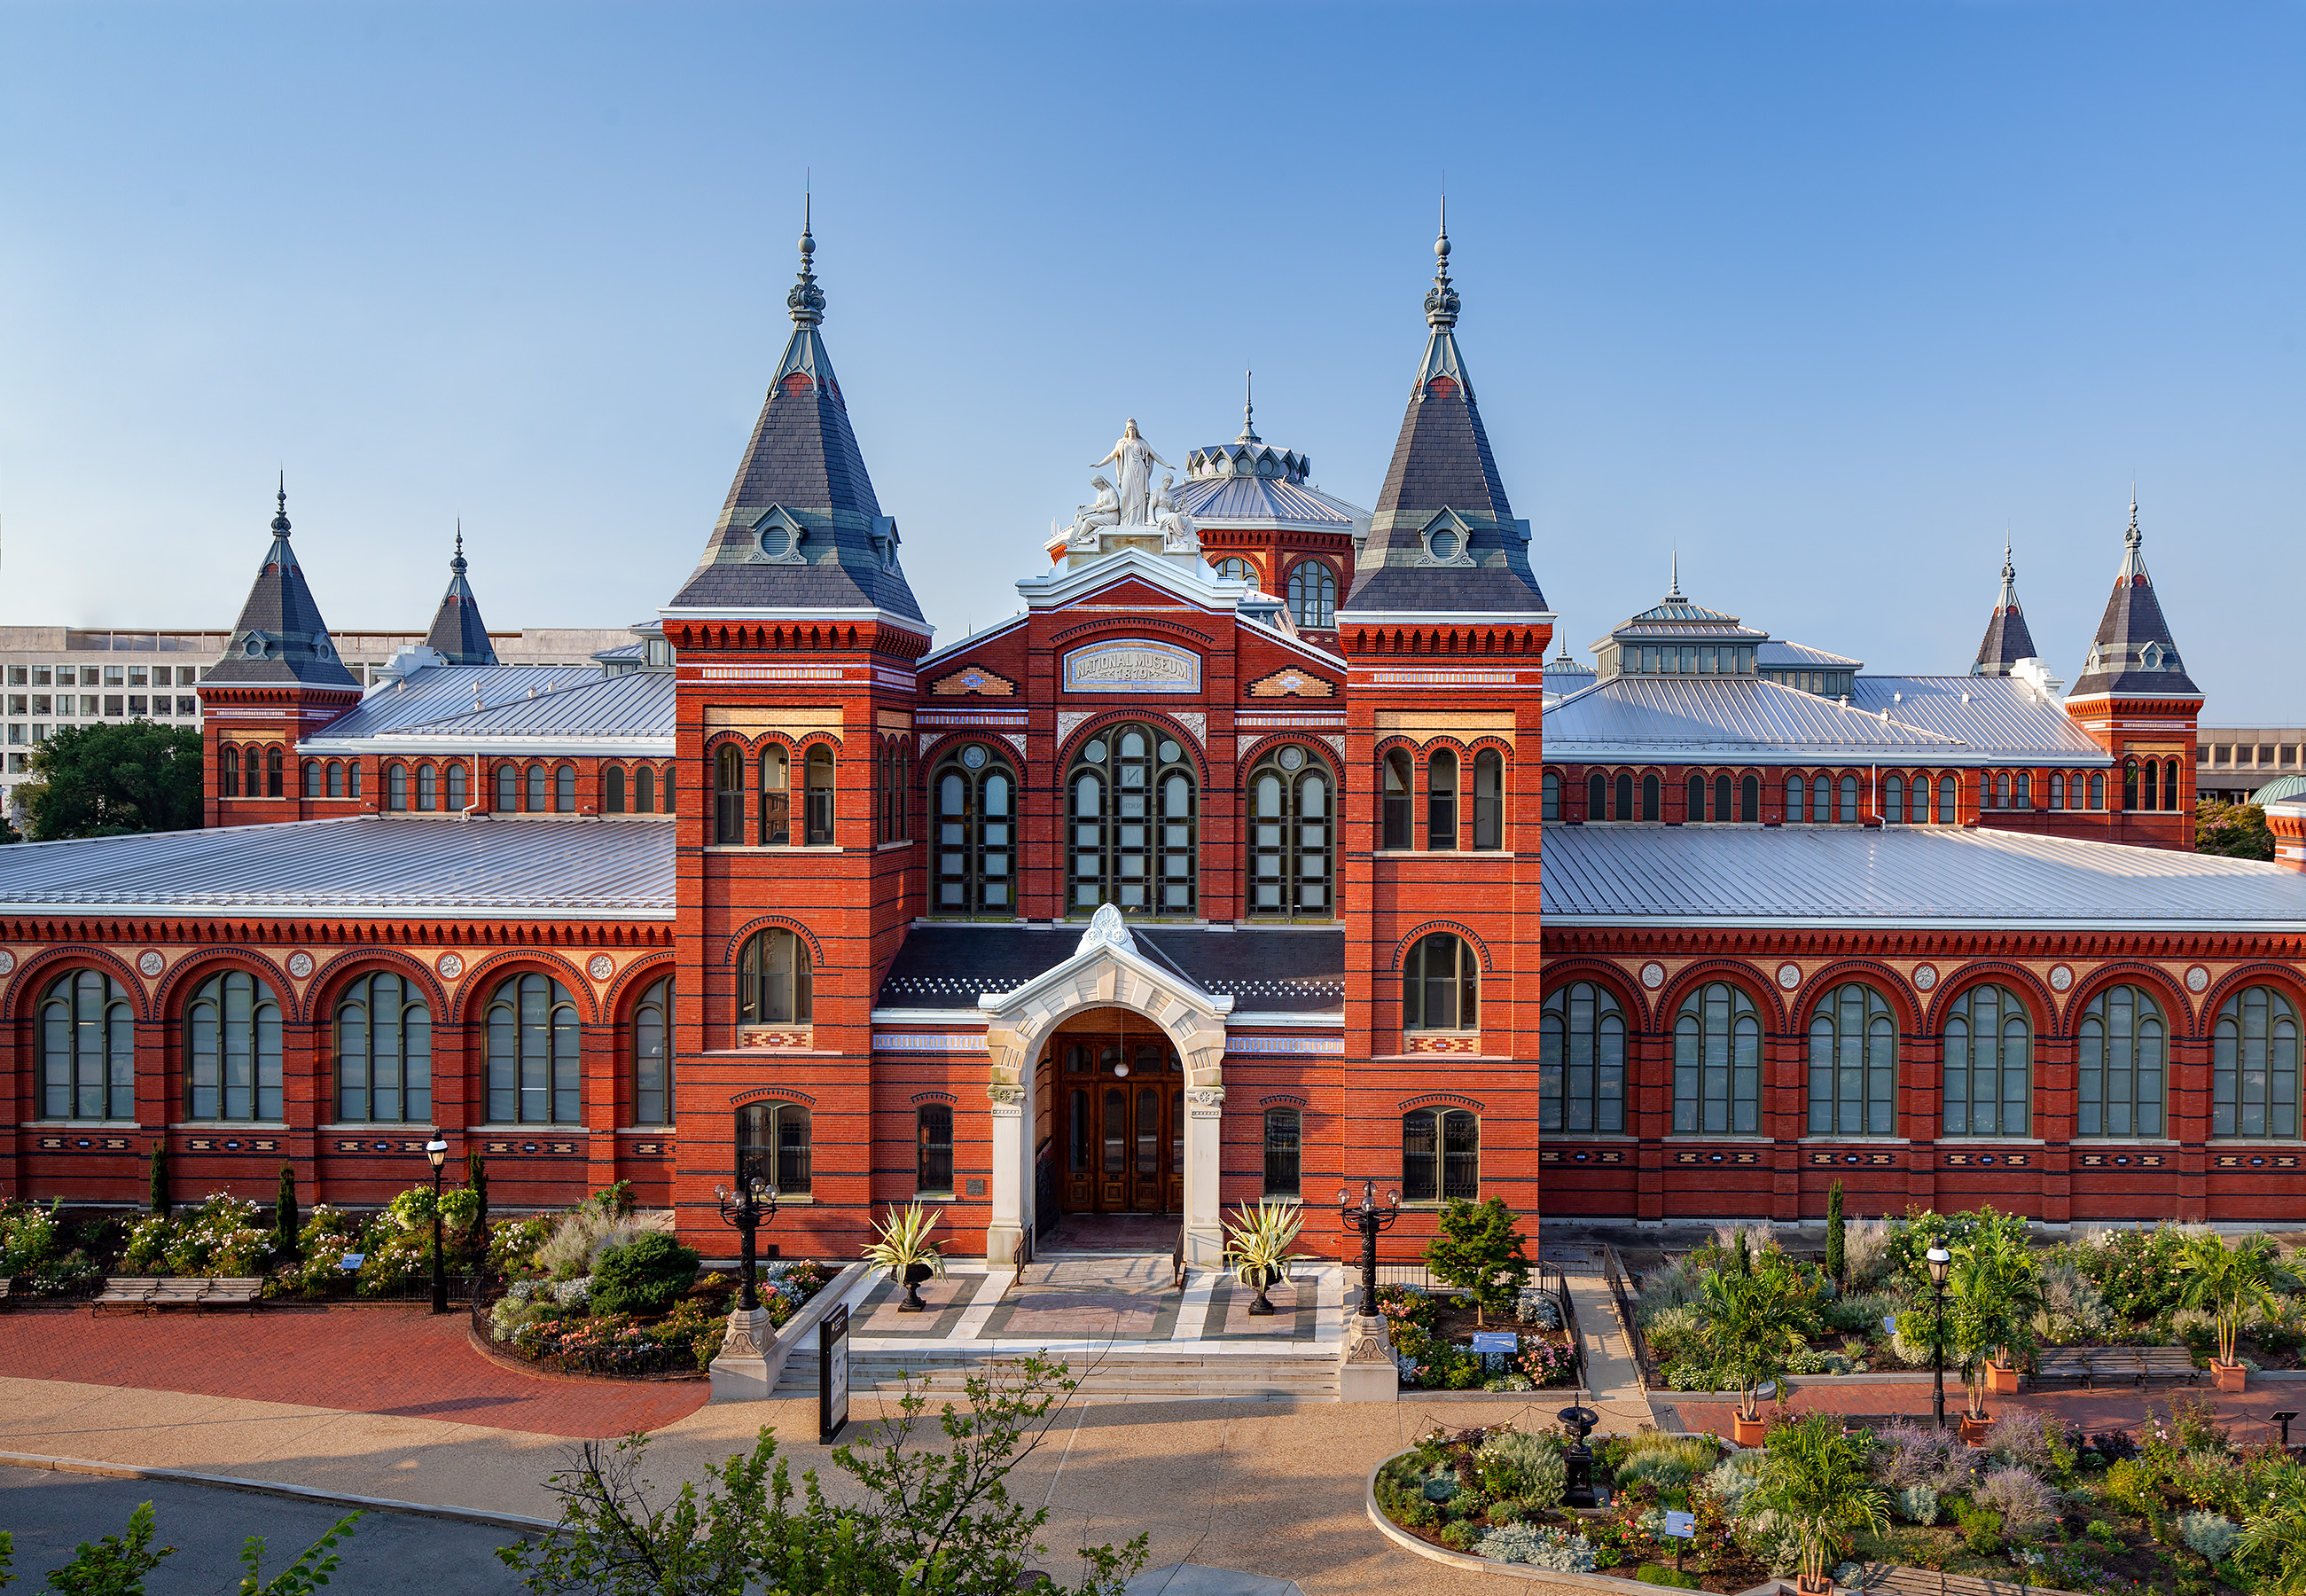 Smithsonian Arts and Industries building with garden in front